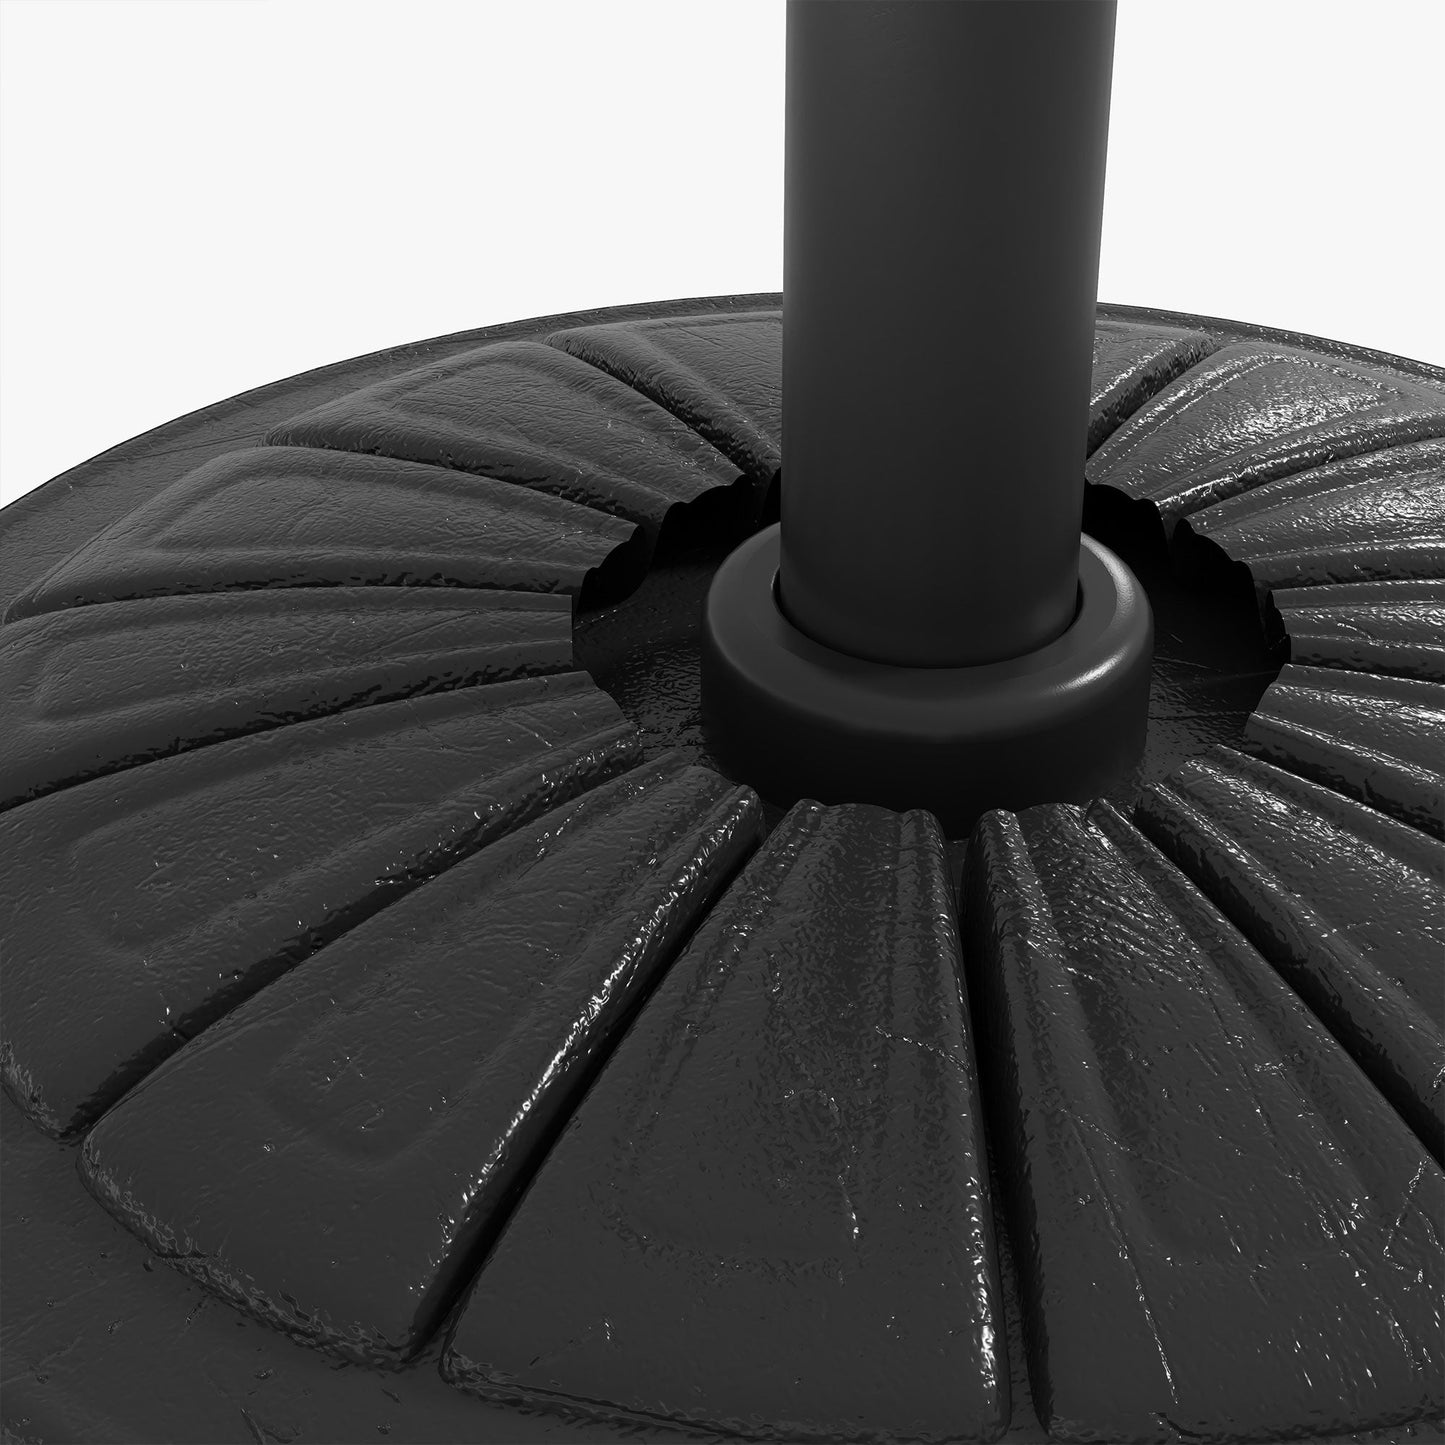 Umbrella Base, Heavy Duty Concrete Base Holder with Steel Pole, Round Parasol Stand for Patio, Outdoor, Backyard, Black at Gallery Canada